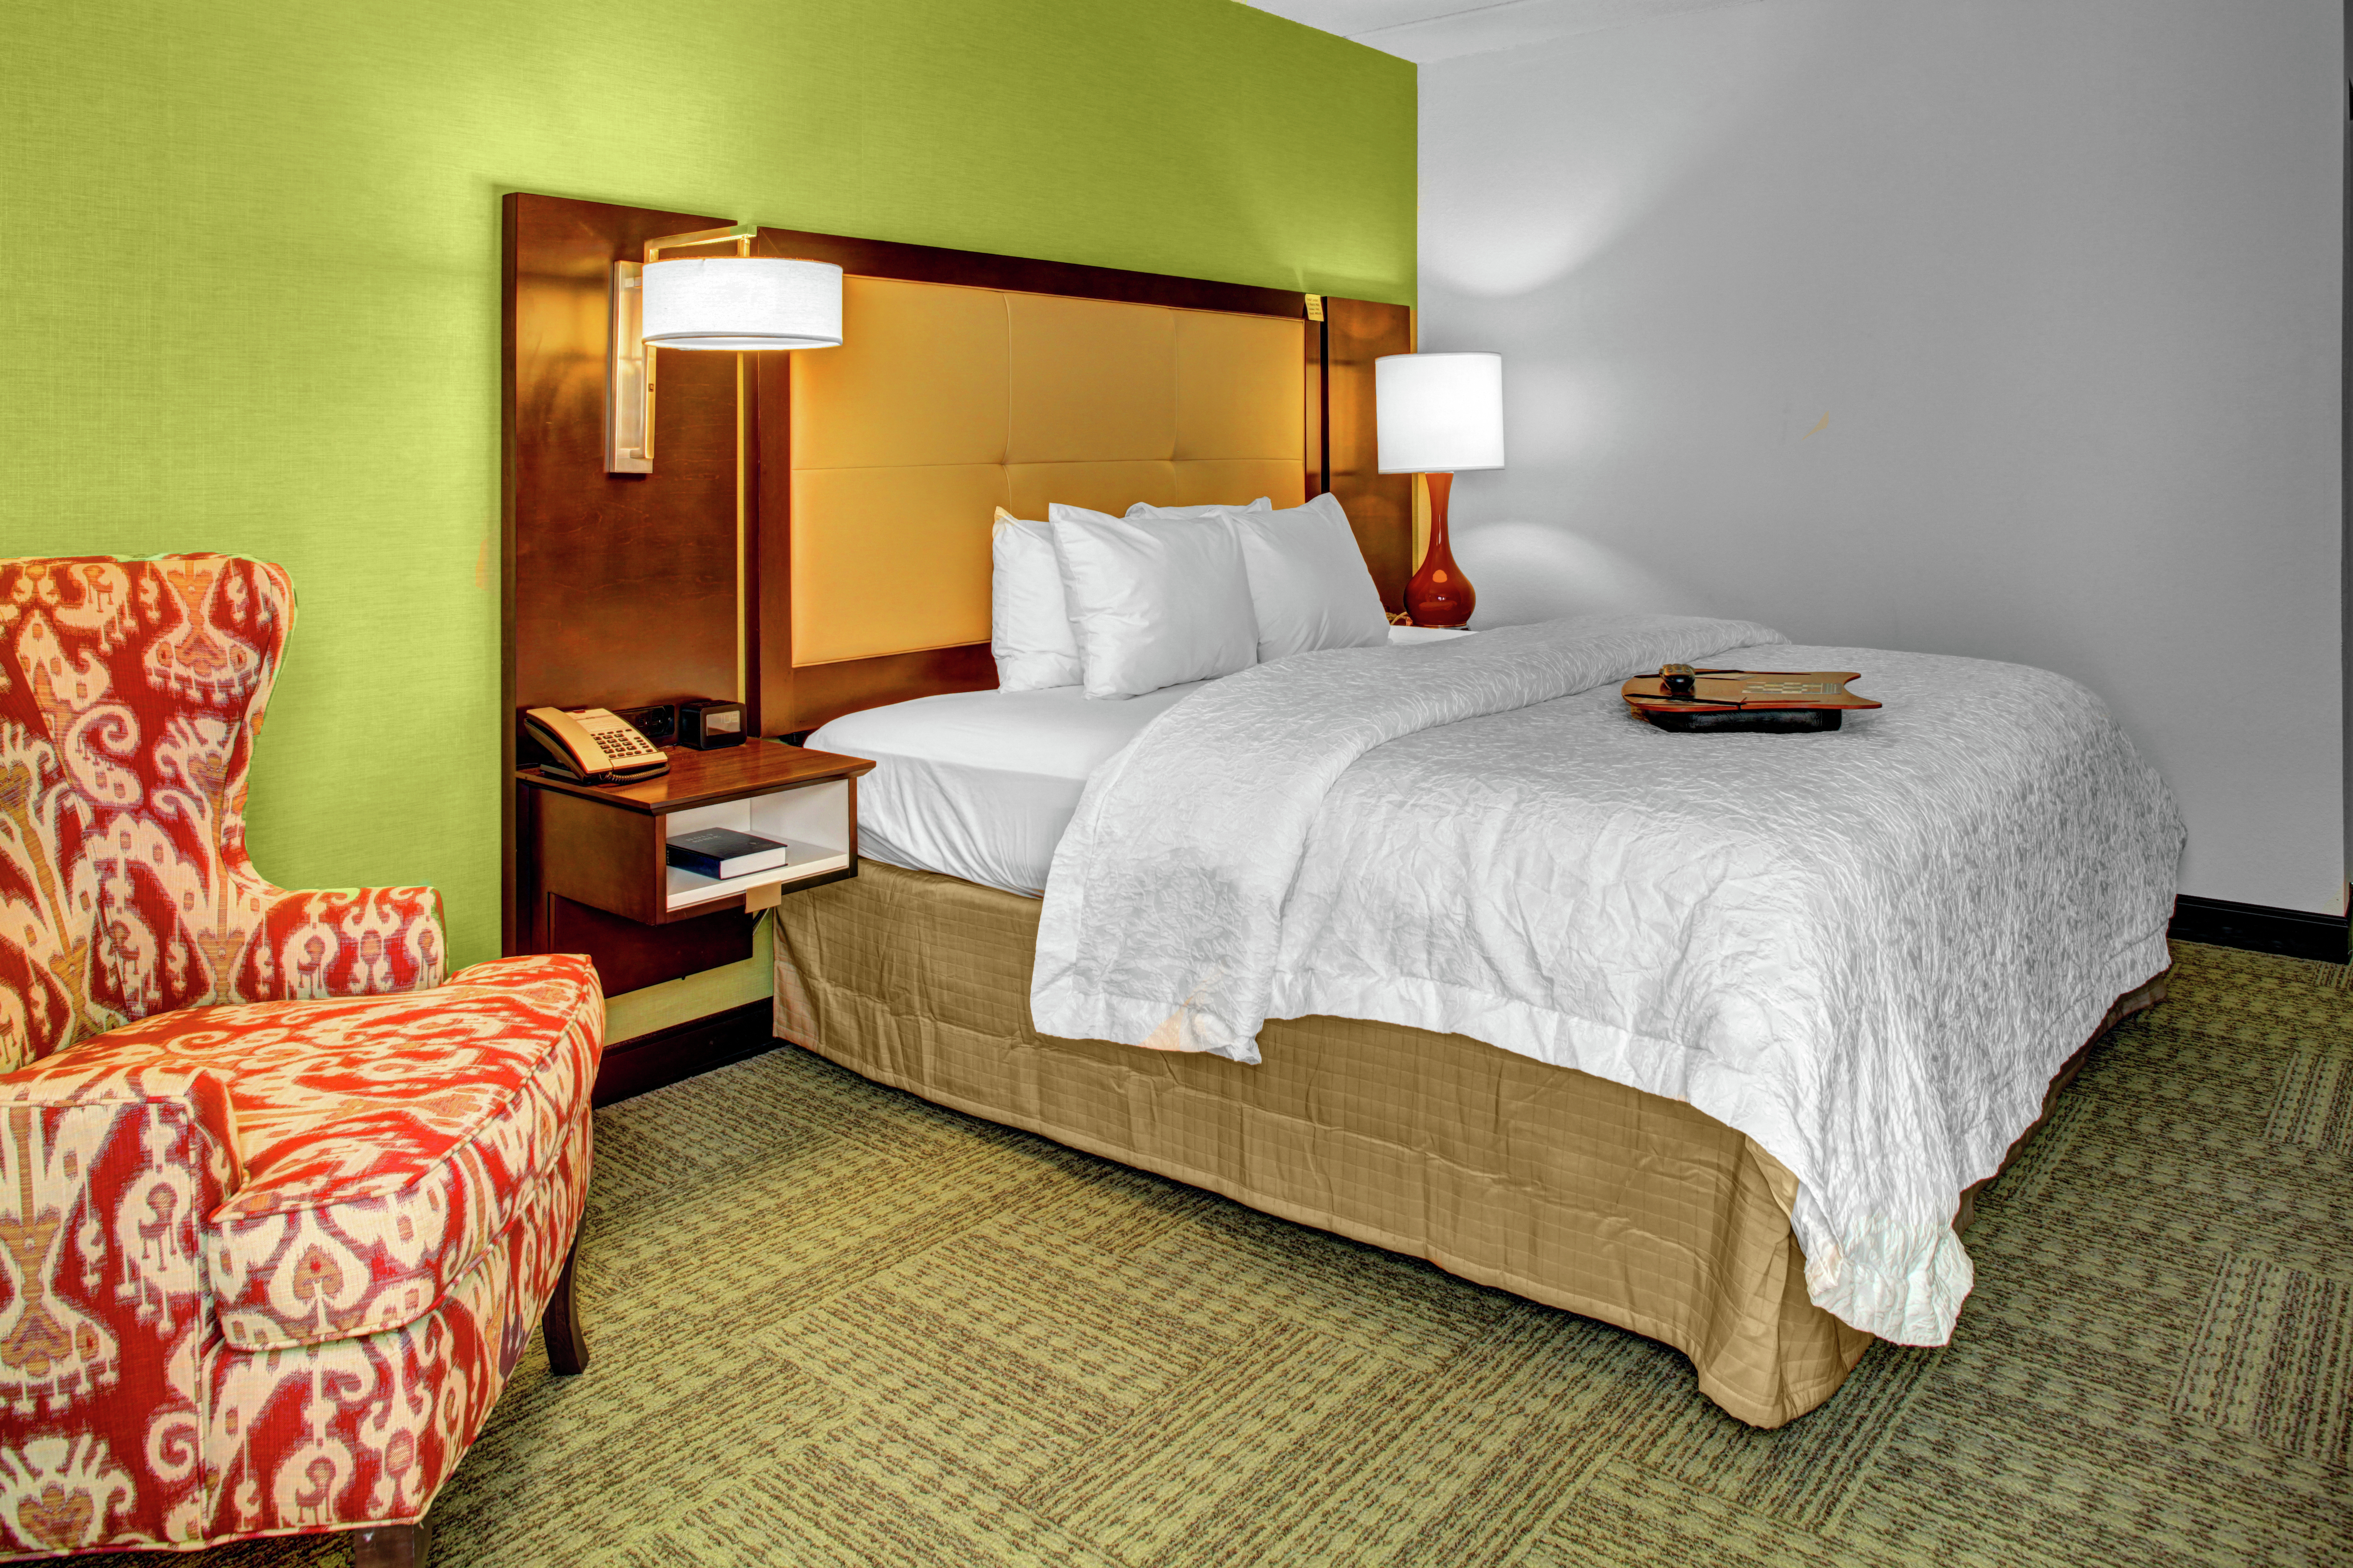 Accessible King Bed Hotel Guestroom